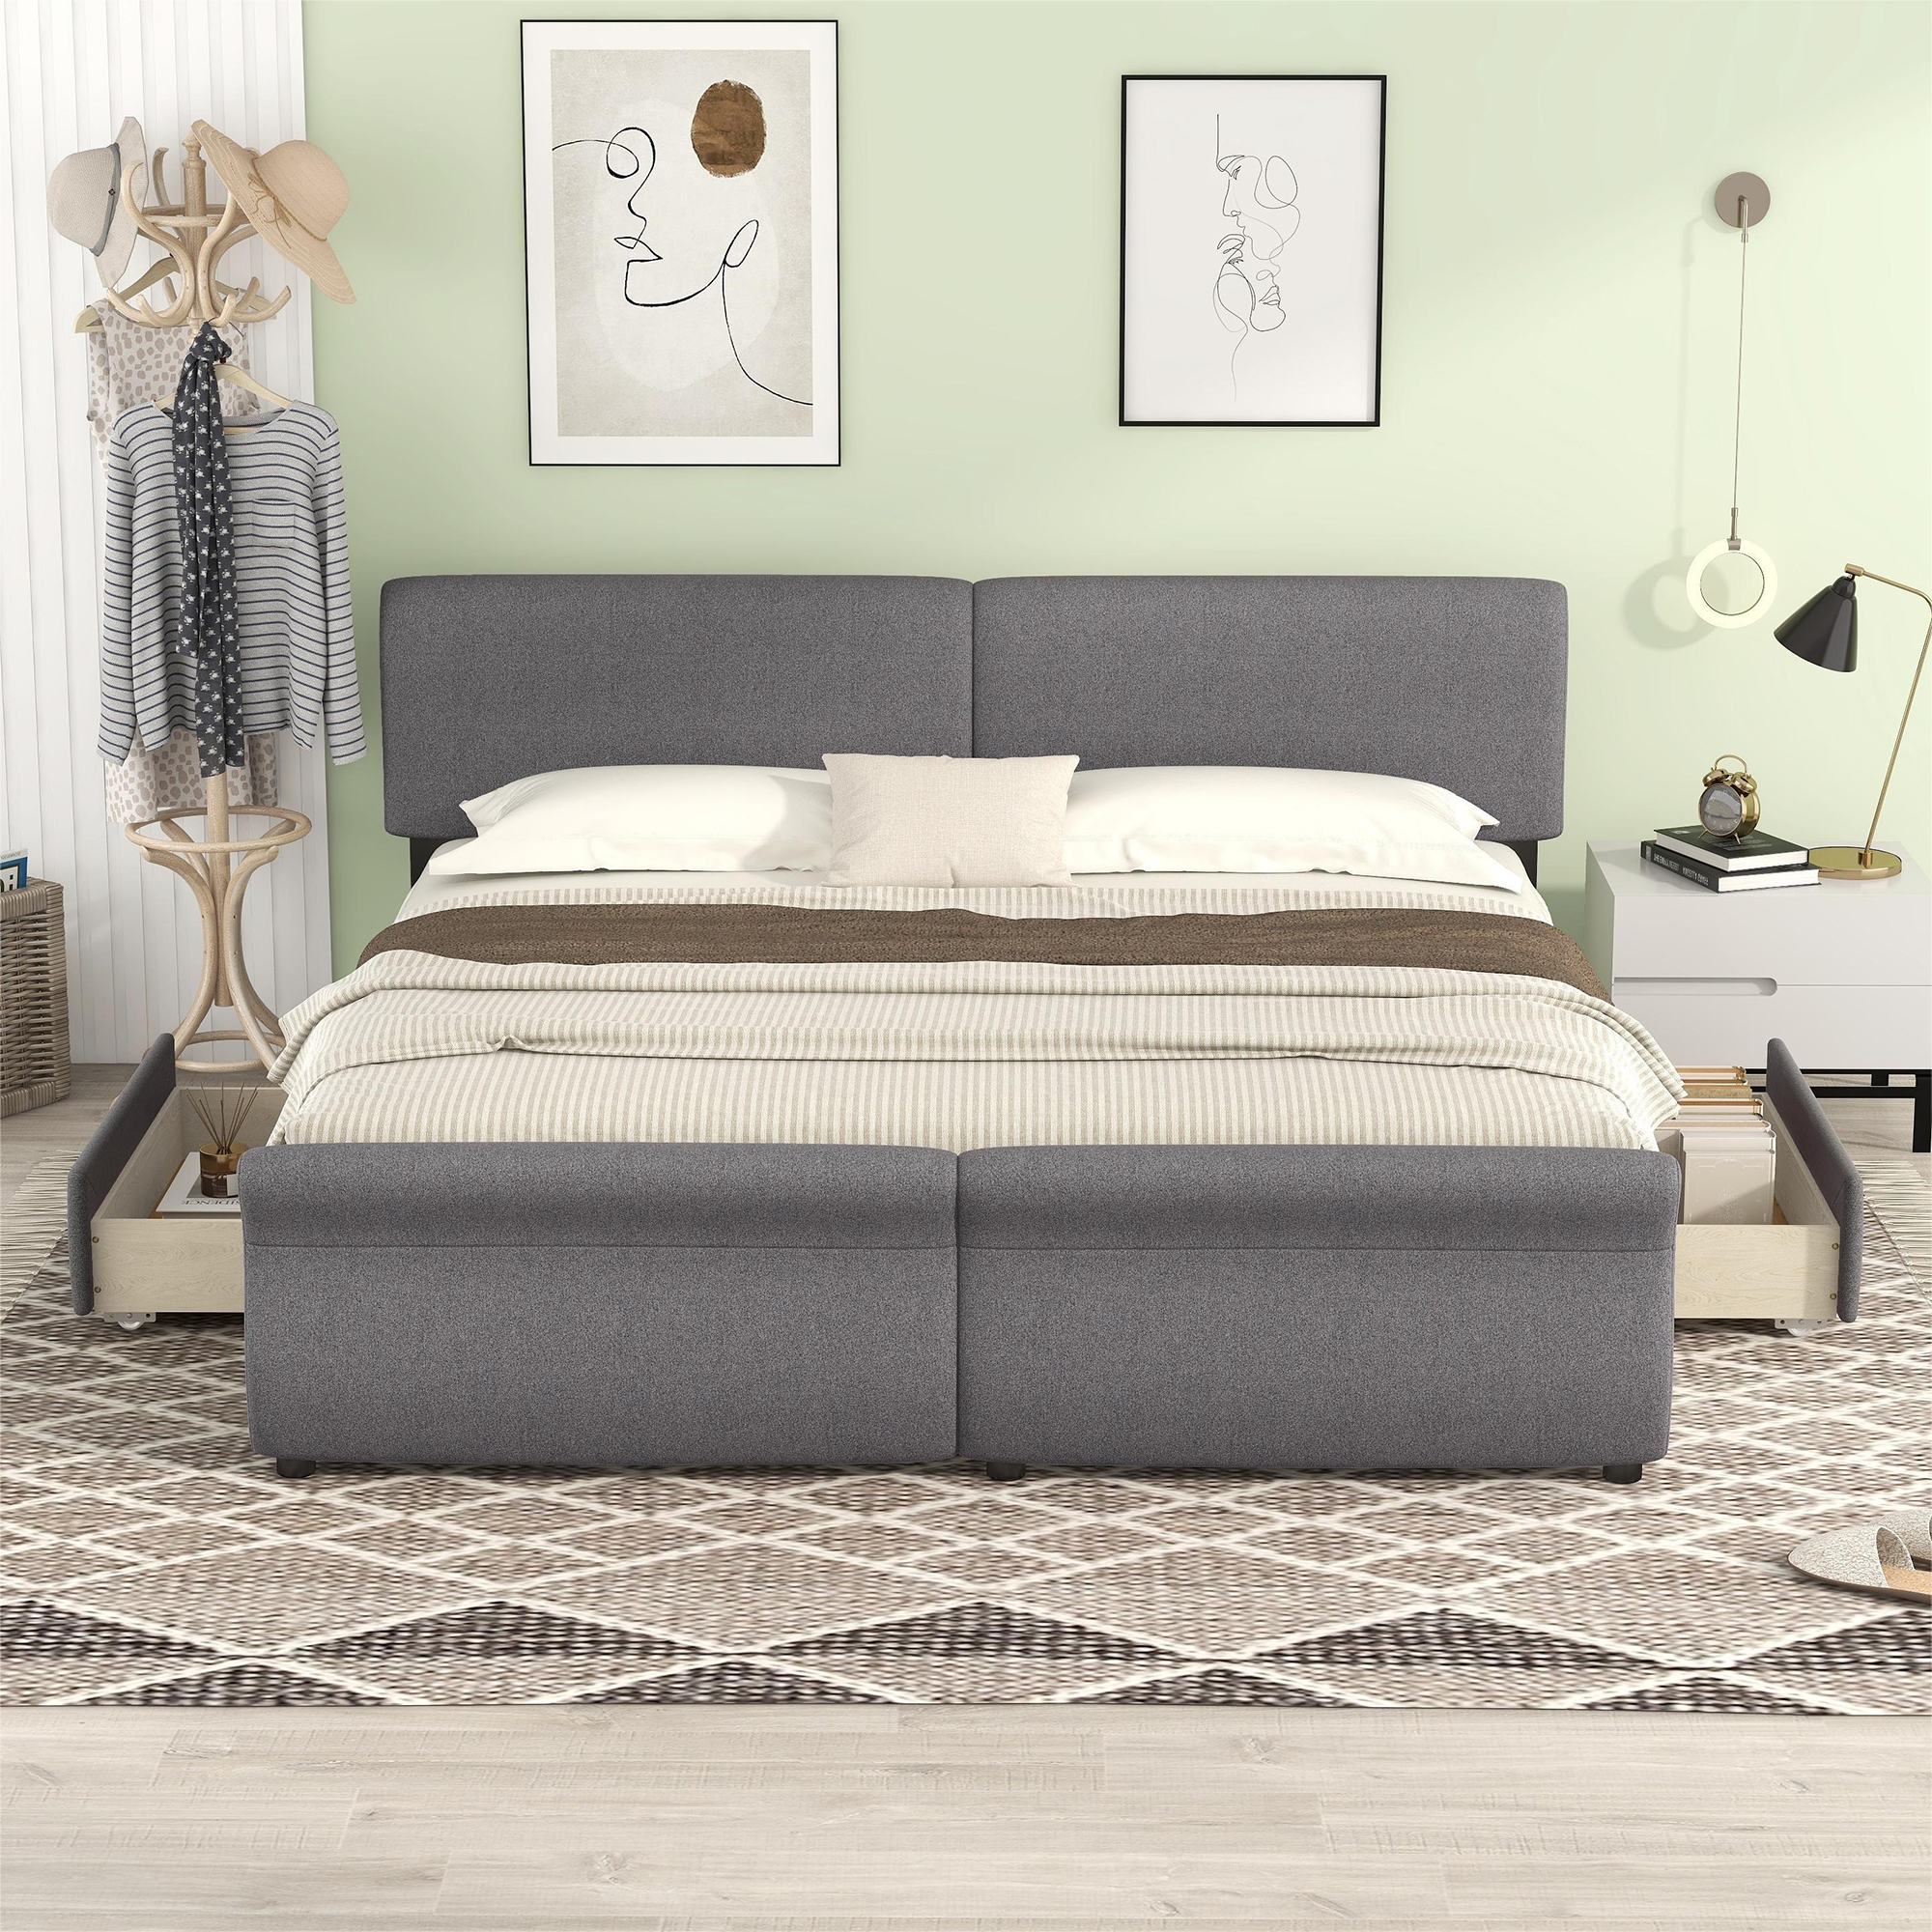 EUROCO Modern King Size Upholstery Platform Bed with Two Drawers for Kids Teen Adults, Upholstery Headboard, Gray - image 2 of 16